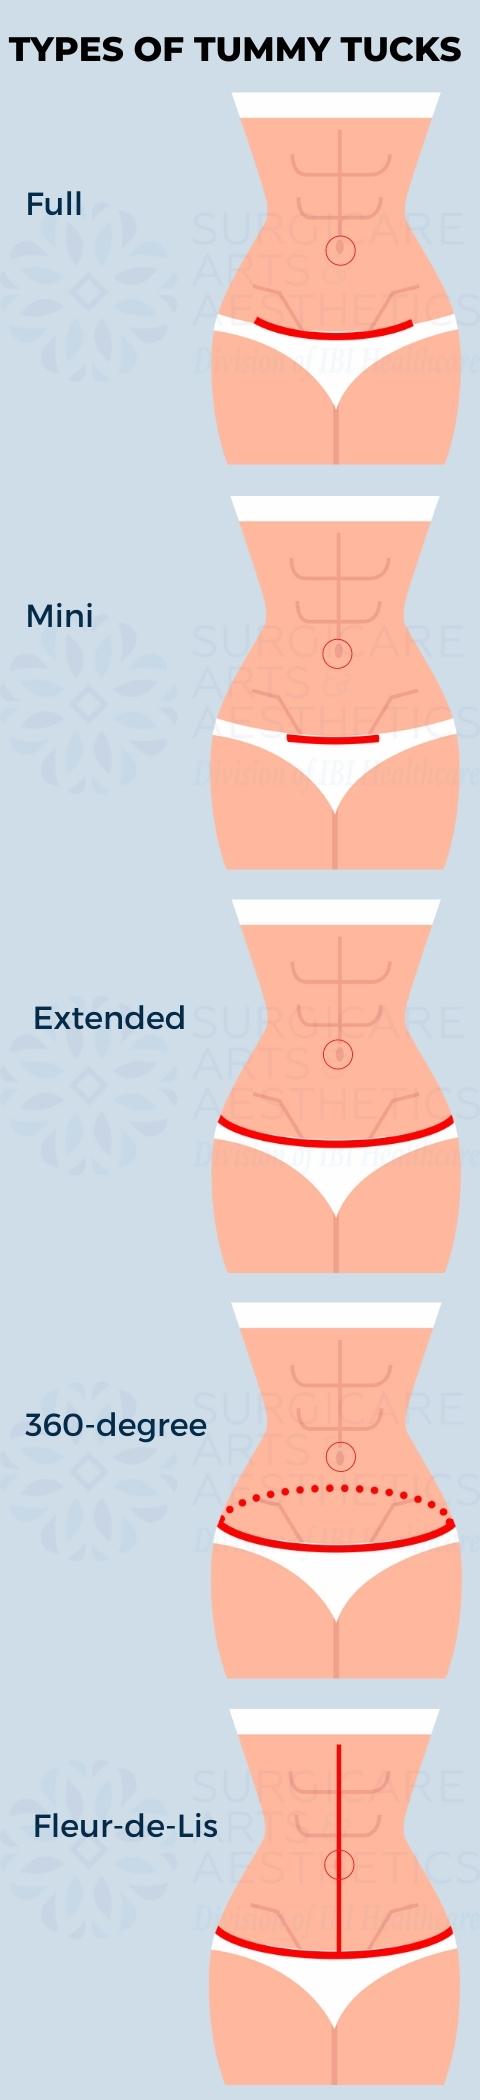 What Is a Mini Tummy Tuck? How Much Does It Cost?